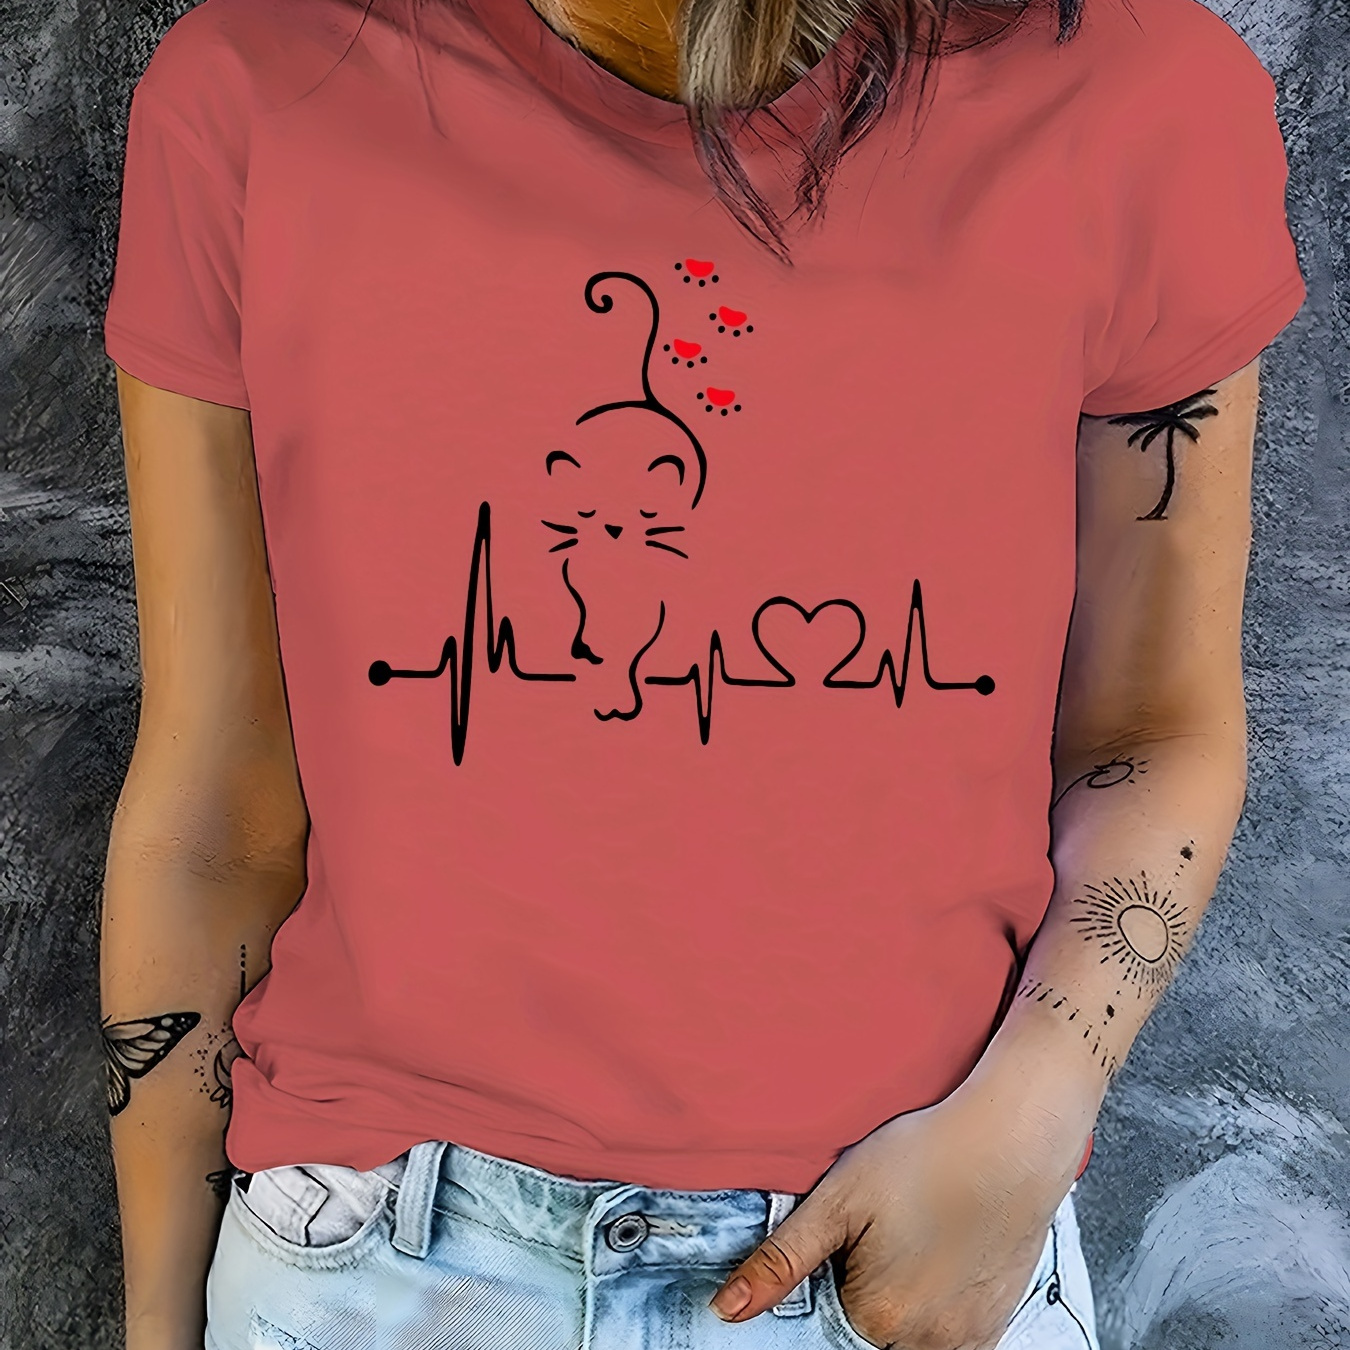 

Cat & Ecg Print T-shirt, Short Sleeve Crew Neck Casual Top For Summer & Spring, Women's Clothing